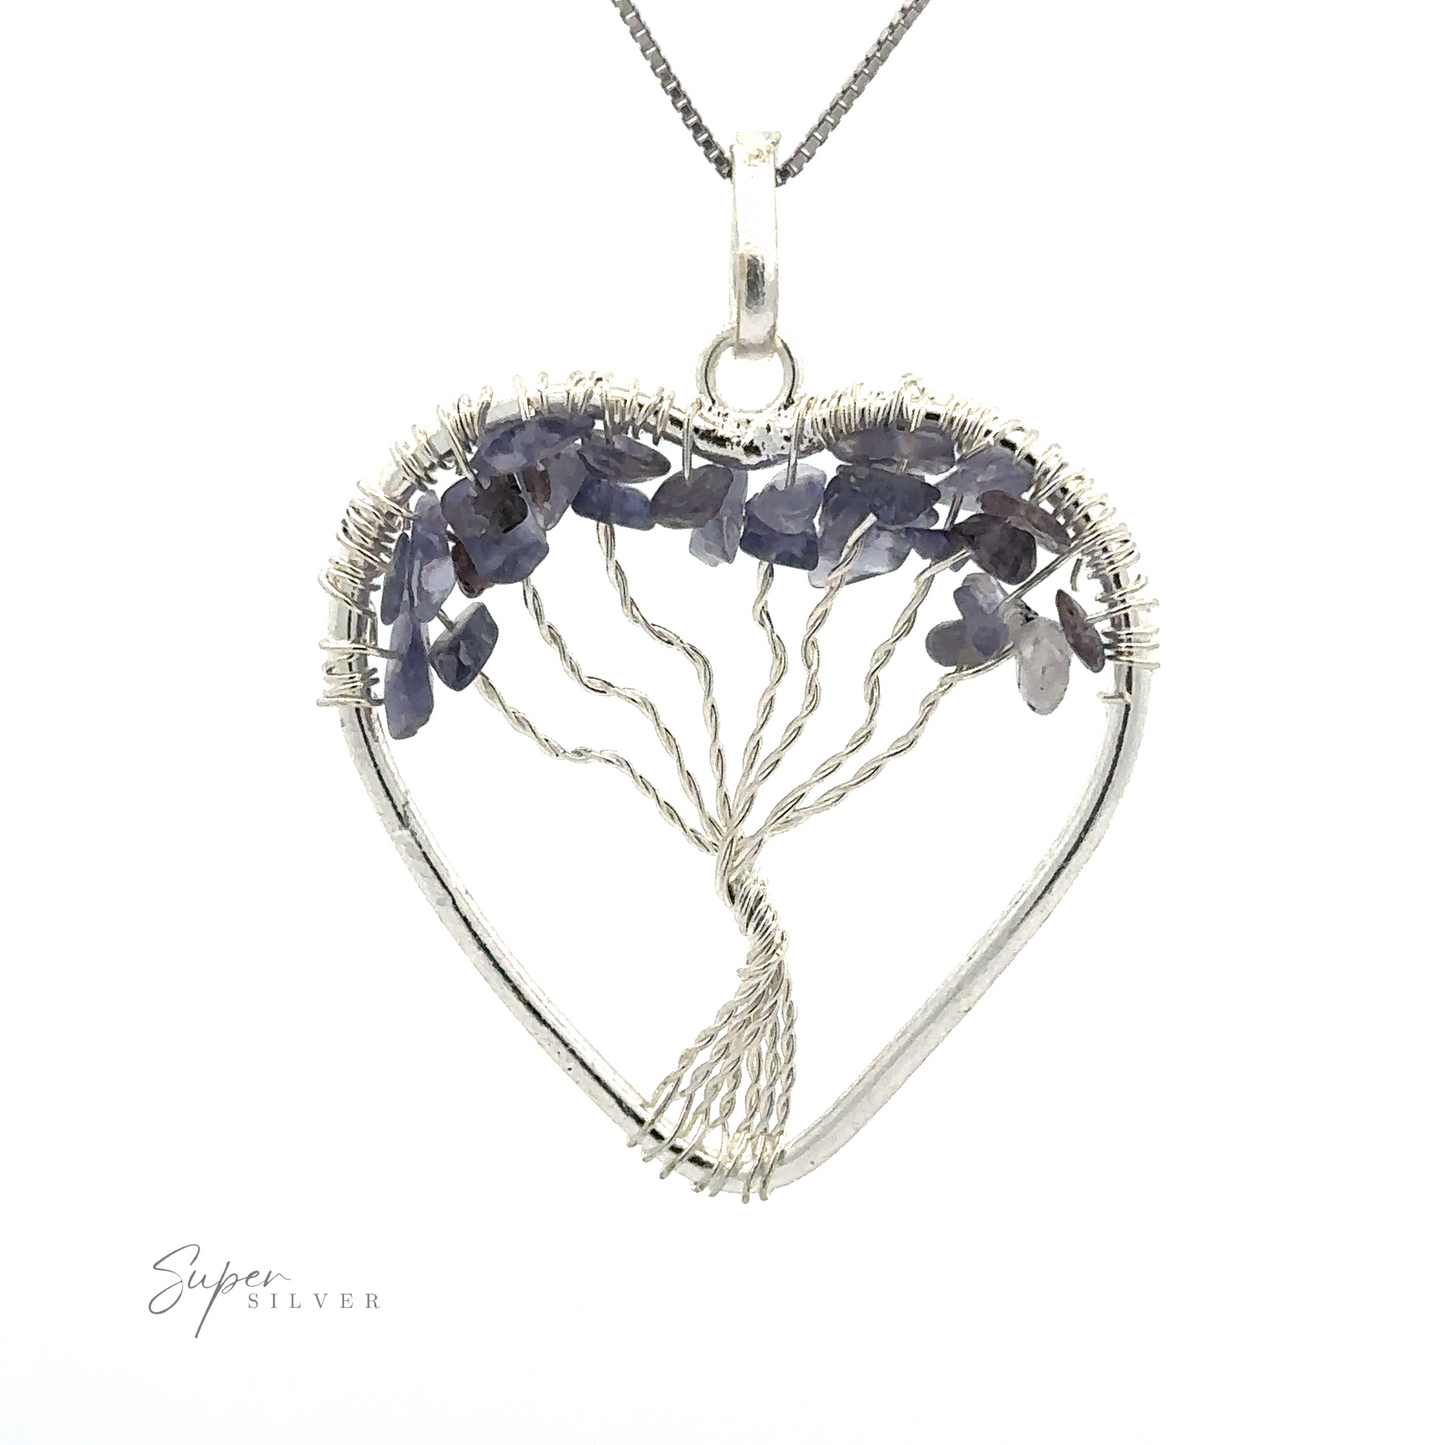 
                  
                    Heart Shaped Tree of Life Pendant featuring a wire wrapped tree of life design made of silver wire, with small purple raw stone beads embellishing the tree branches, shown against a white background.
                  
                